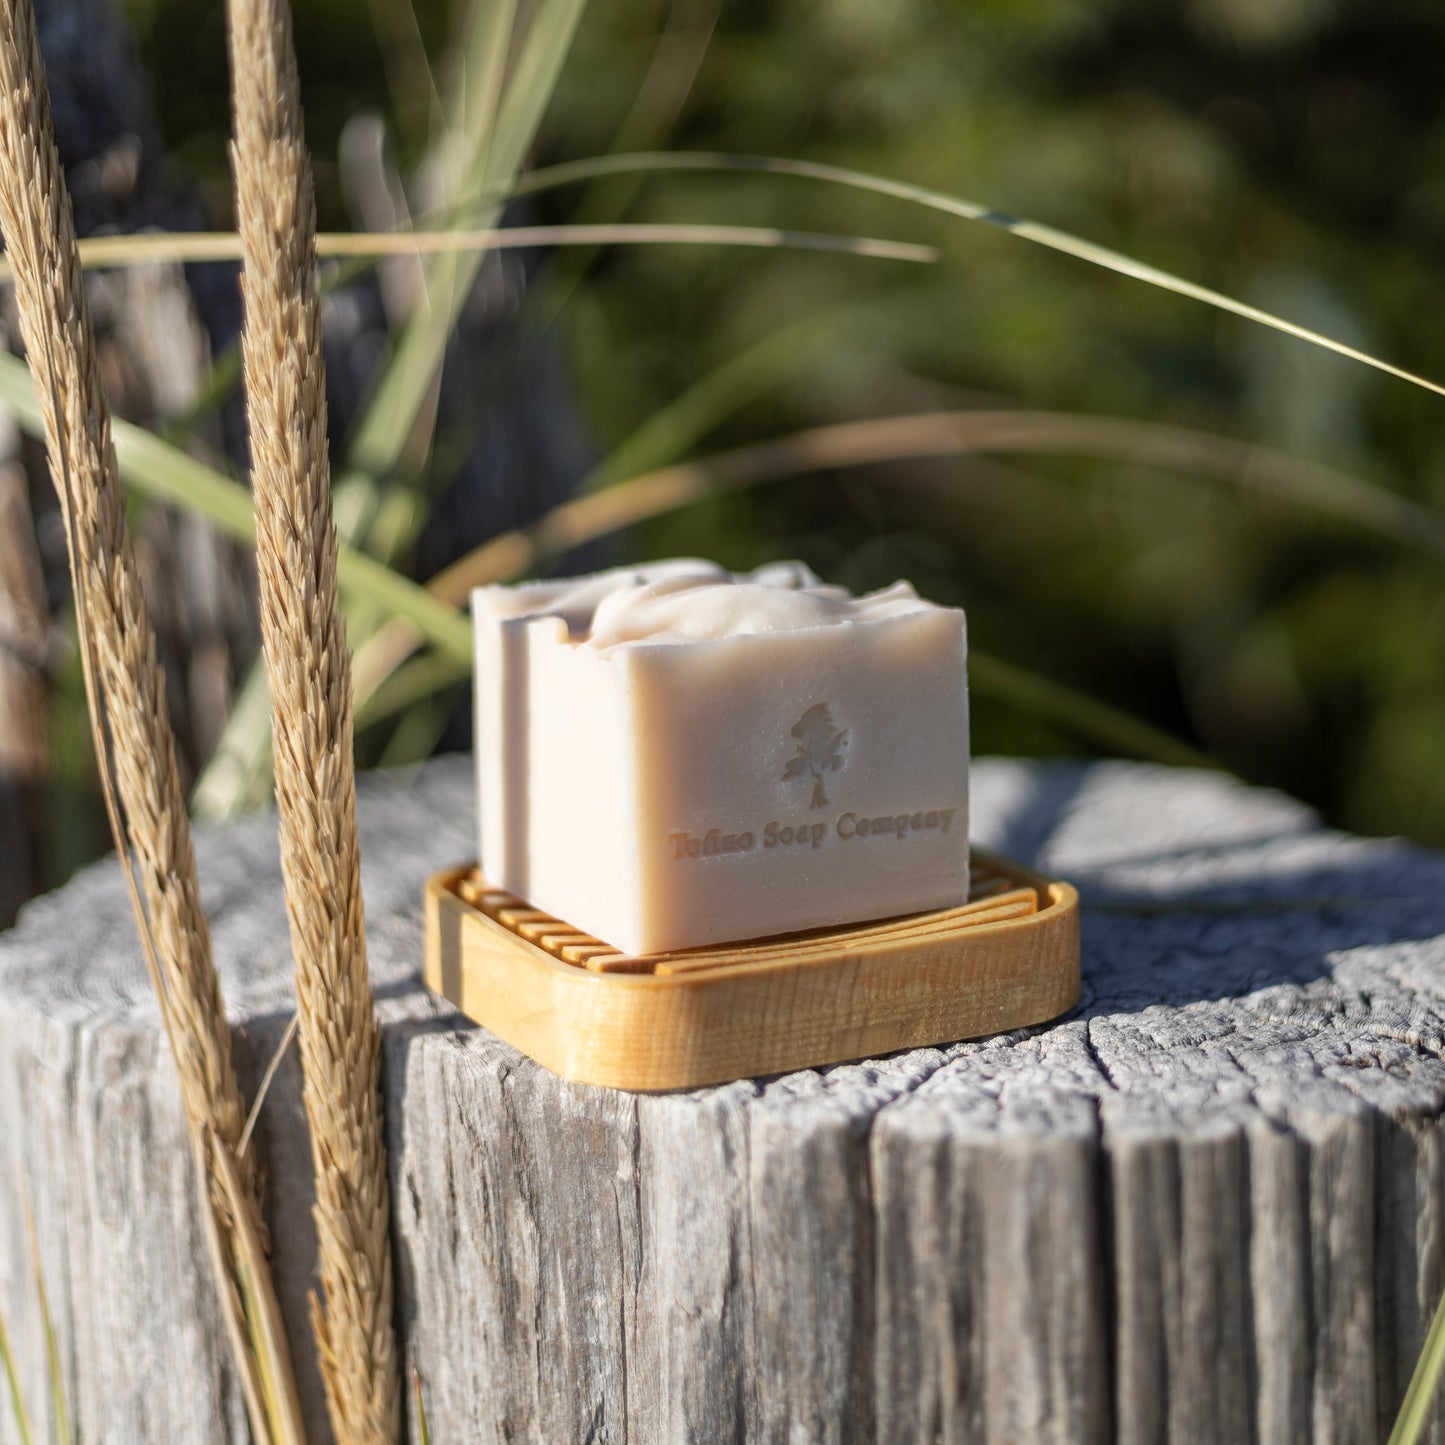 TSC | The Woods Natural Soap Cubes